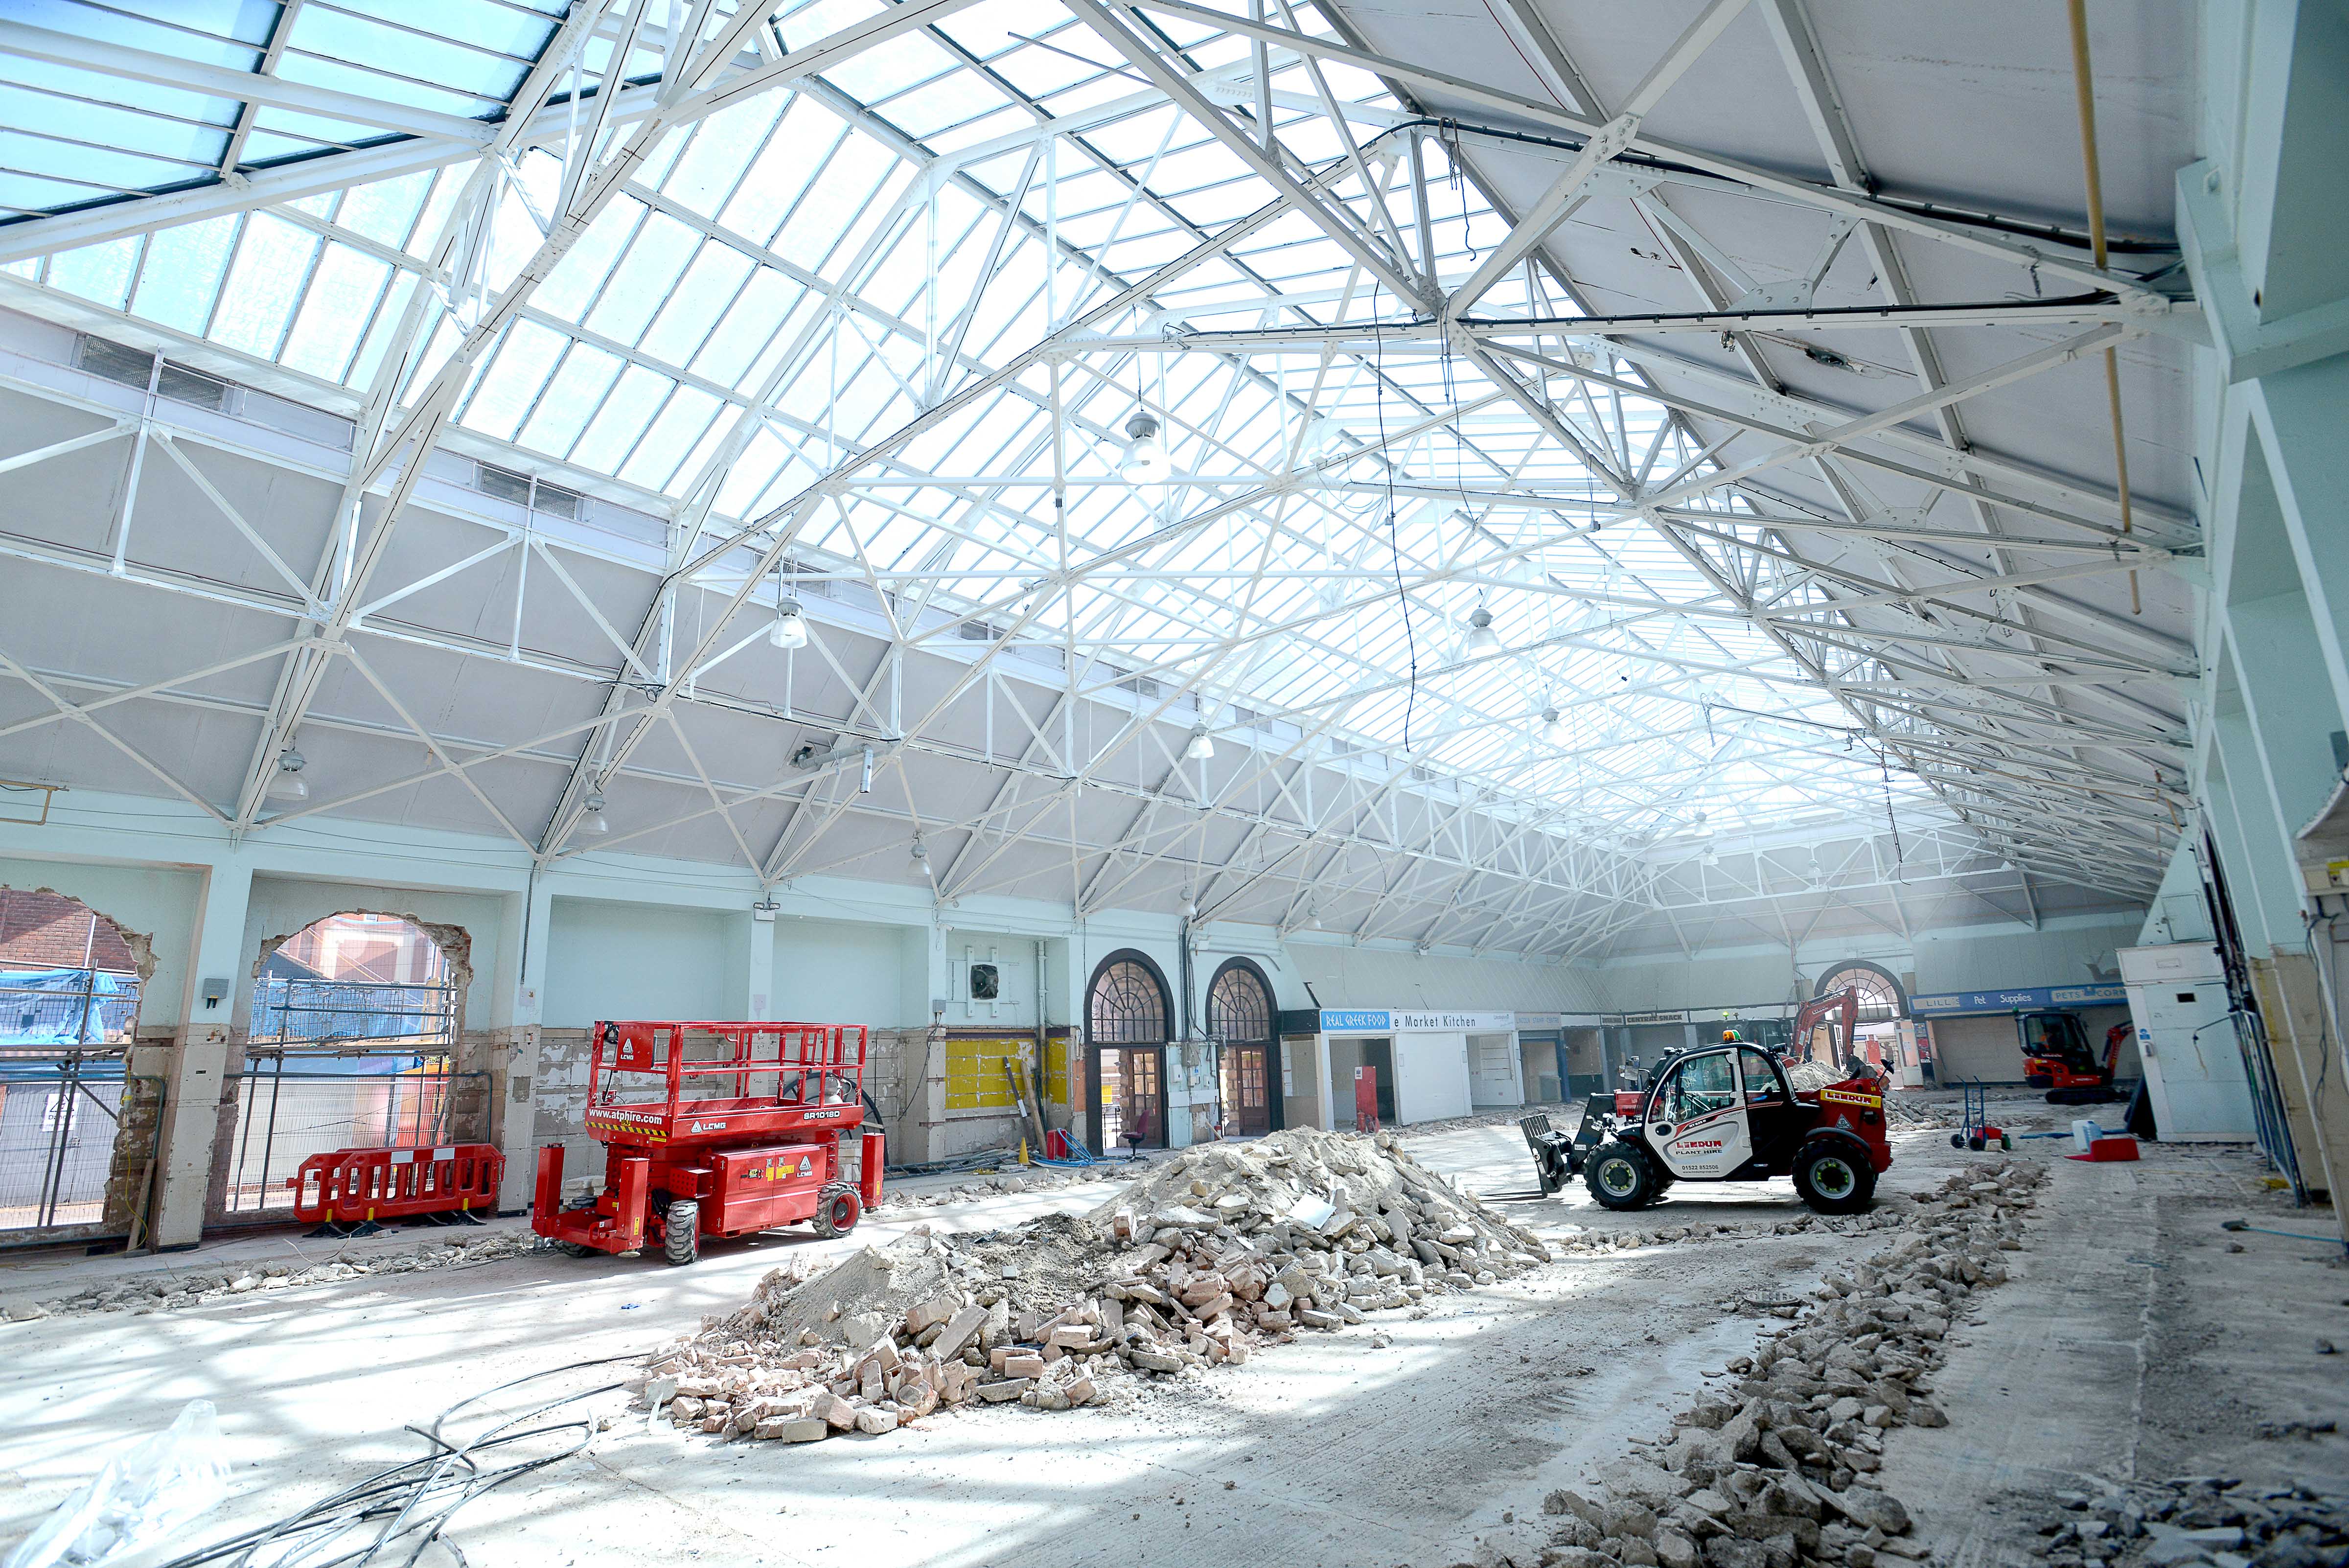 An image showing the market hall at Lincoln Central Market